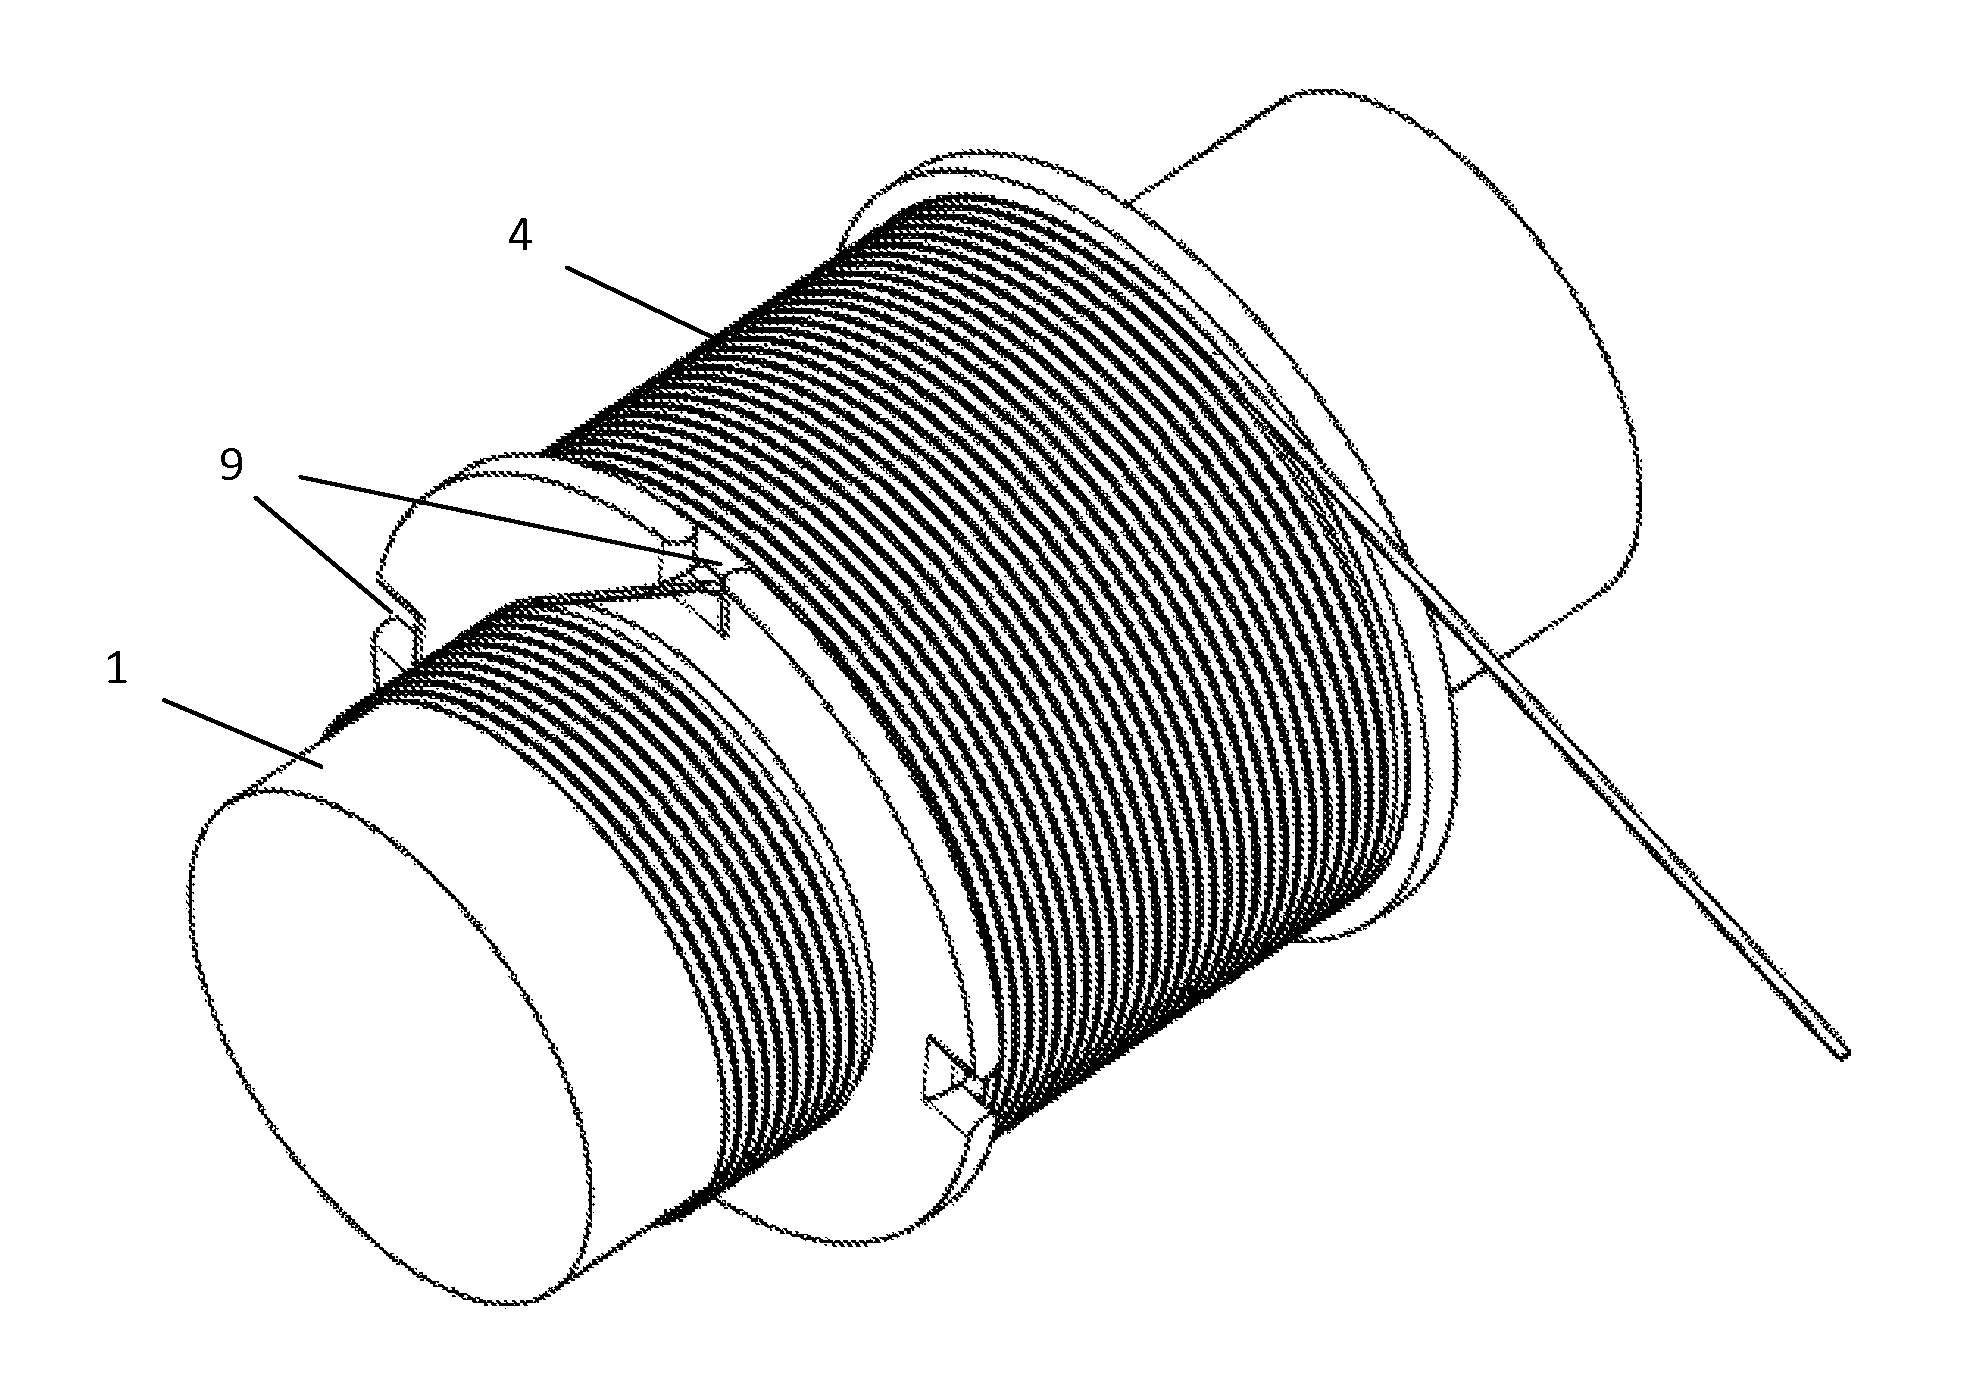 Method of manufacturing multilayer metal wire or ribbon bandage over operational zone of rotor